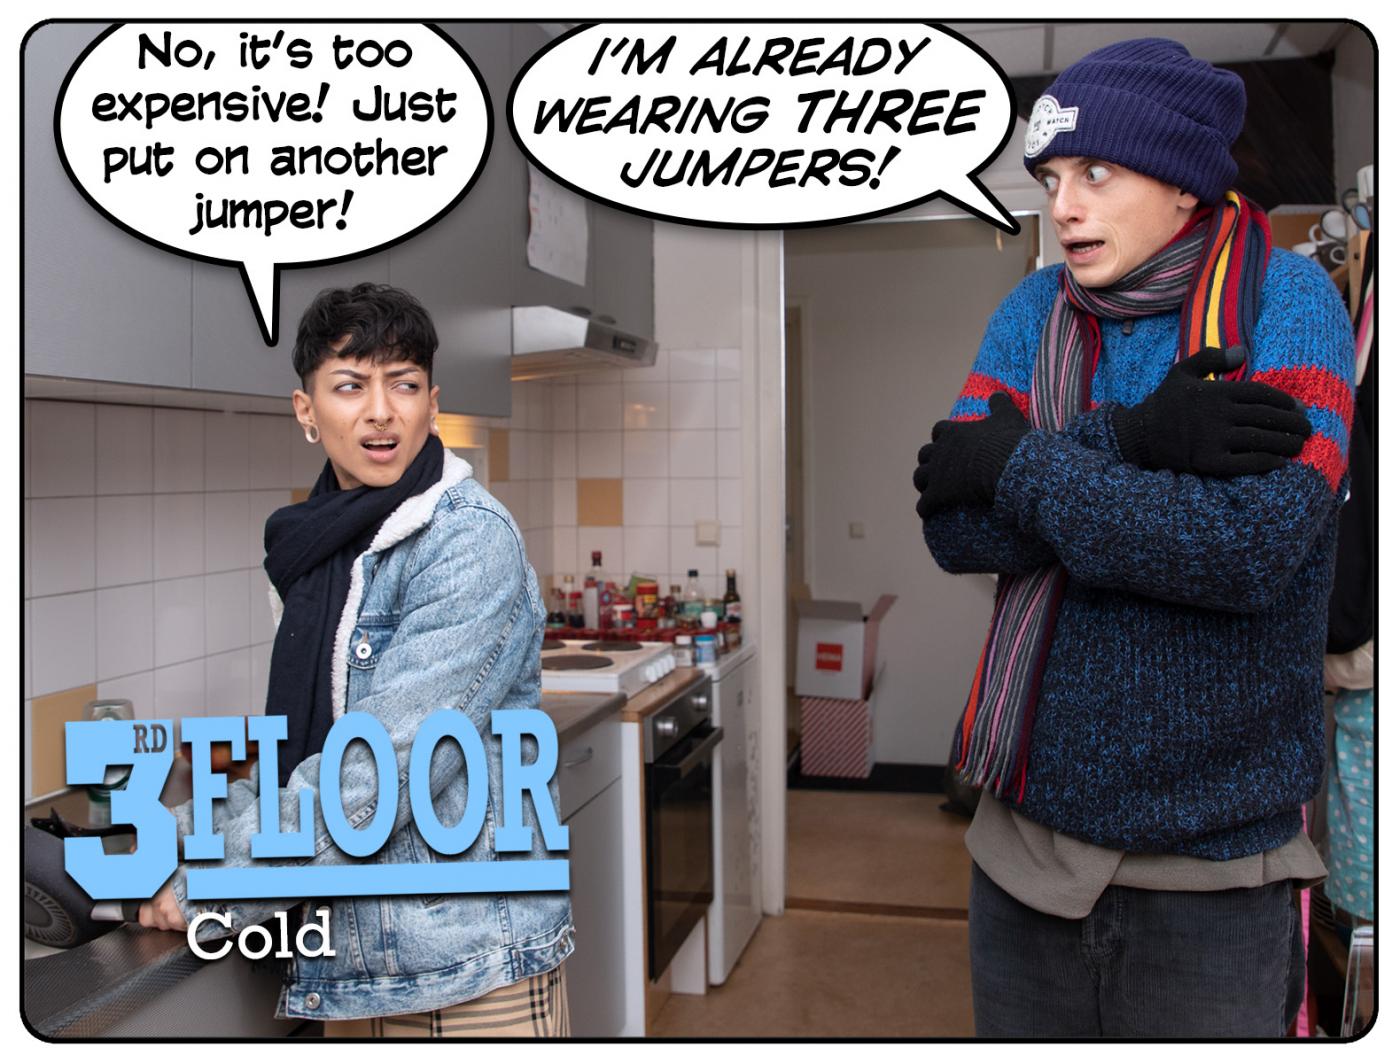 3rd Floor: Cold